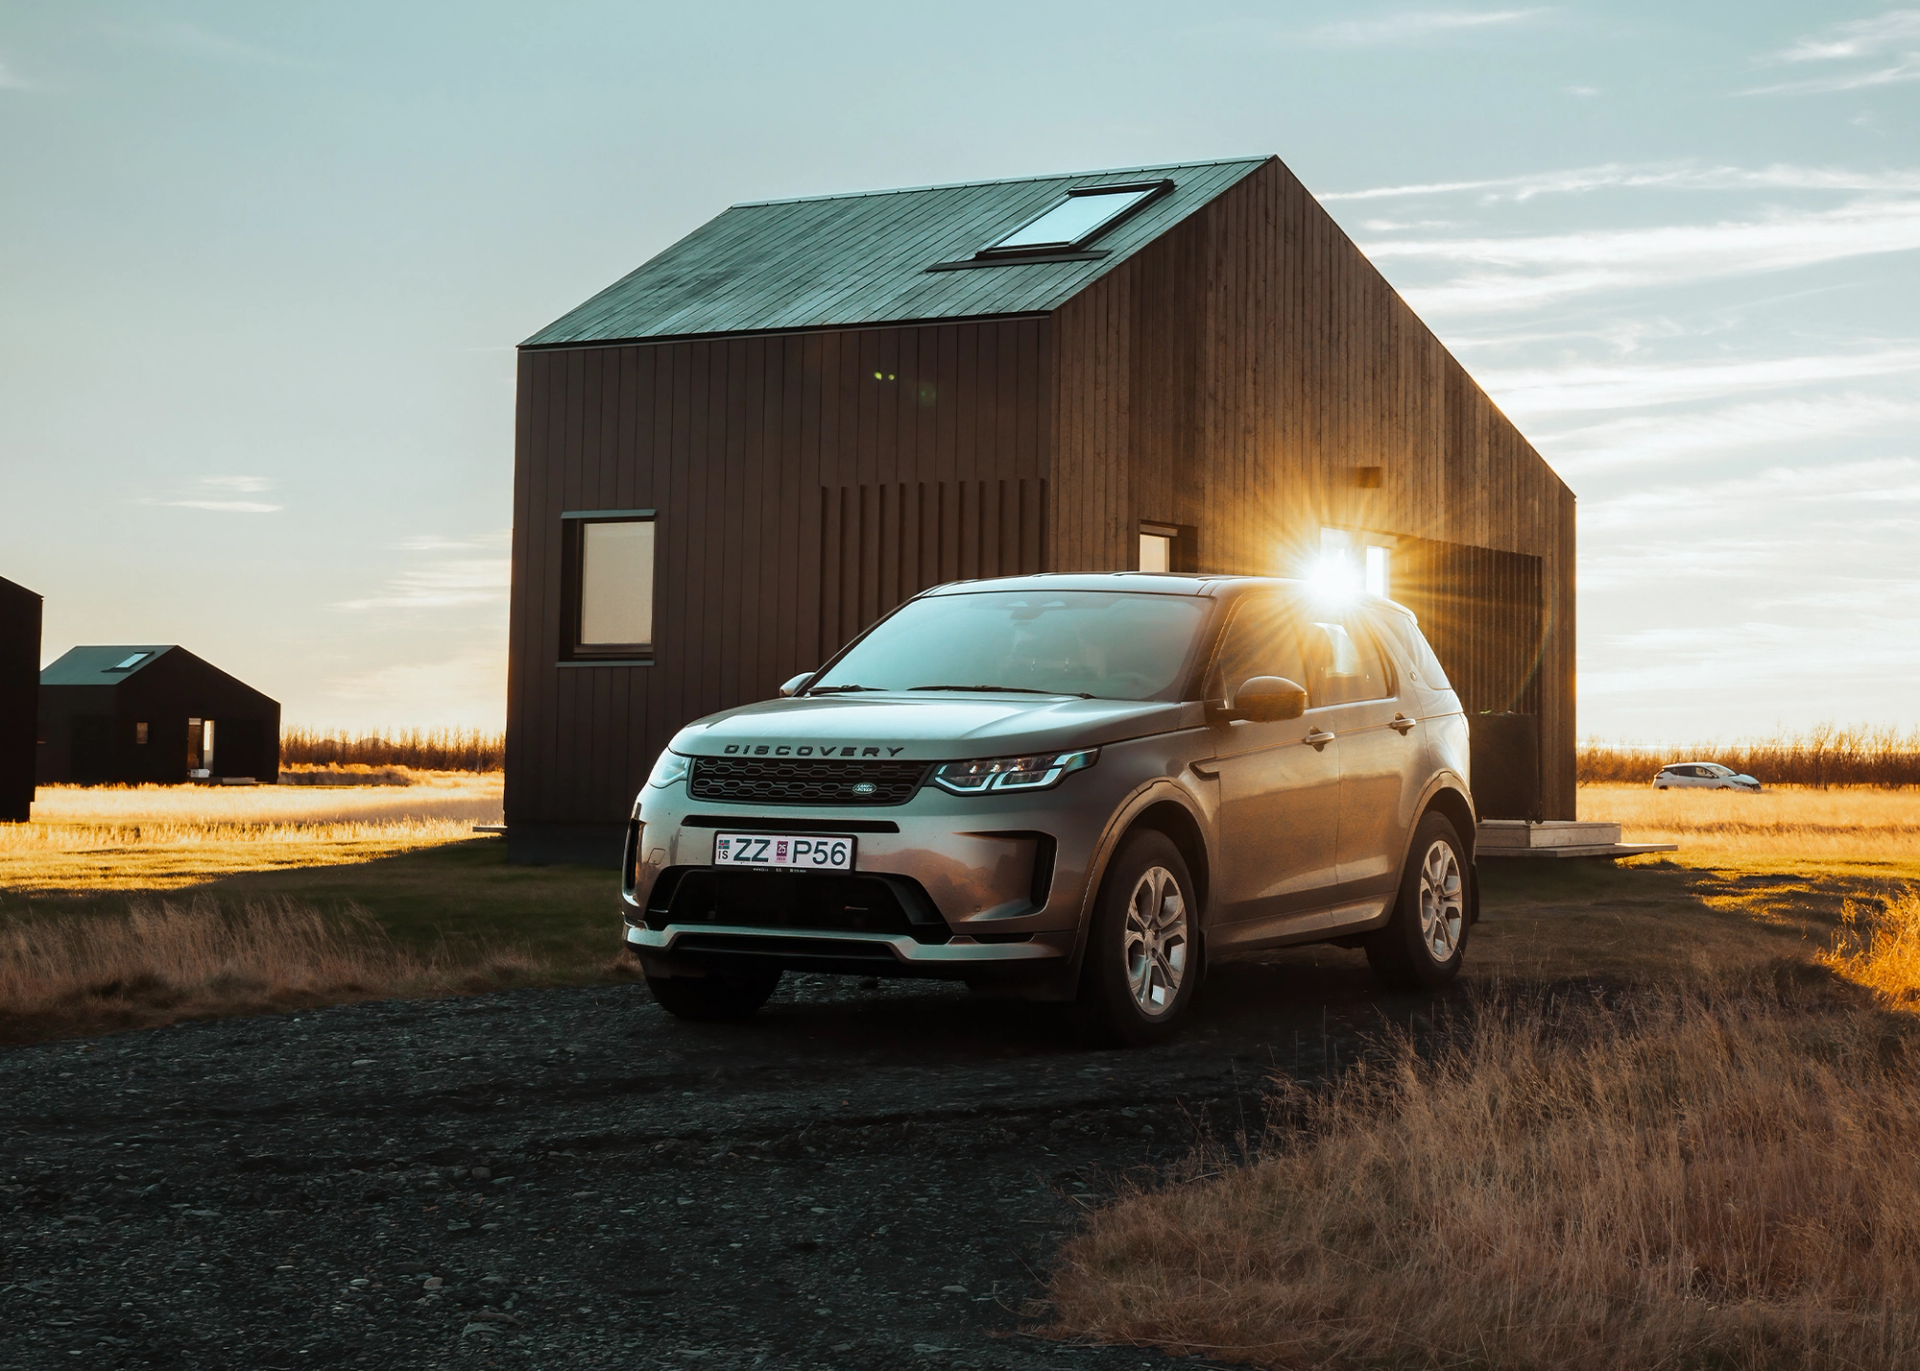 Dark gray Land Rover Discovery Sport rental car parked near a brown house